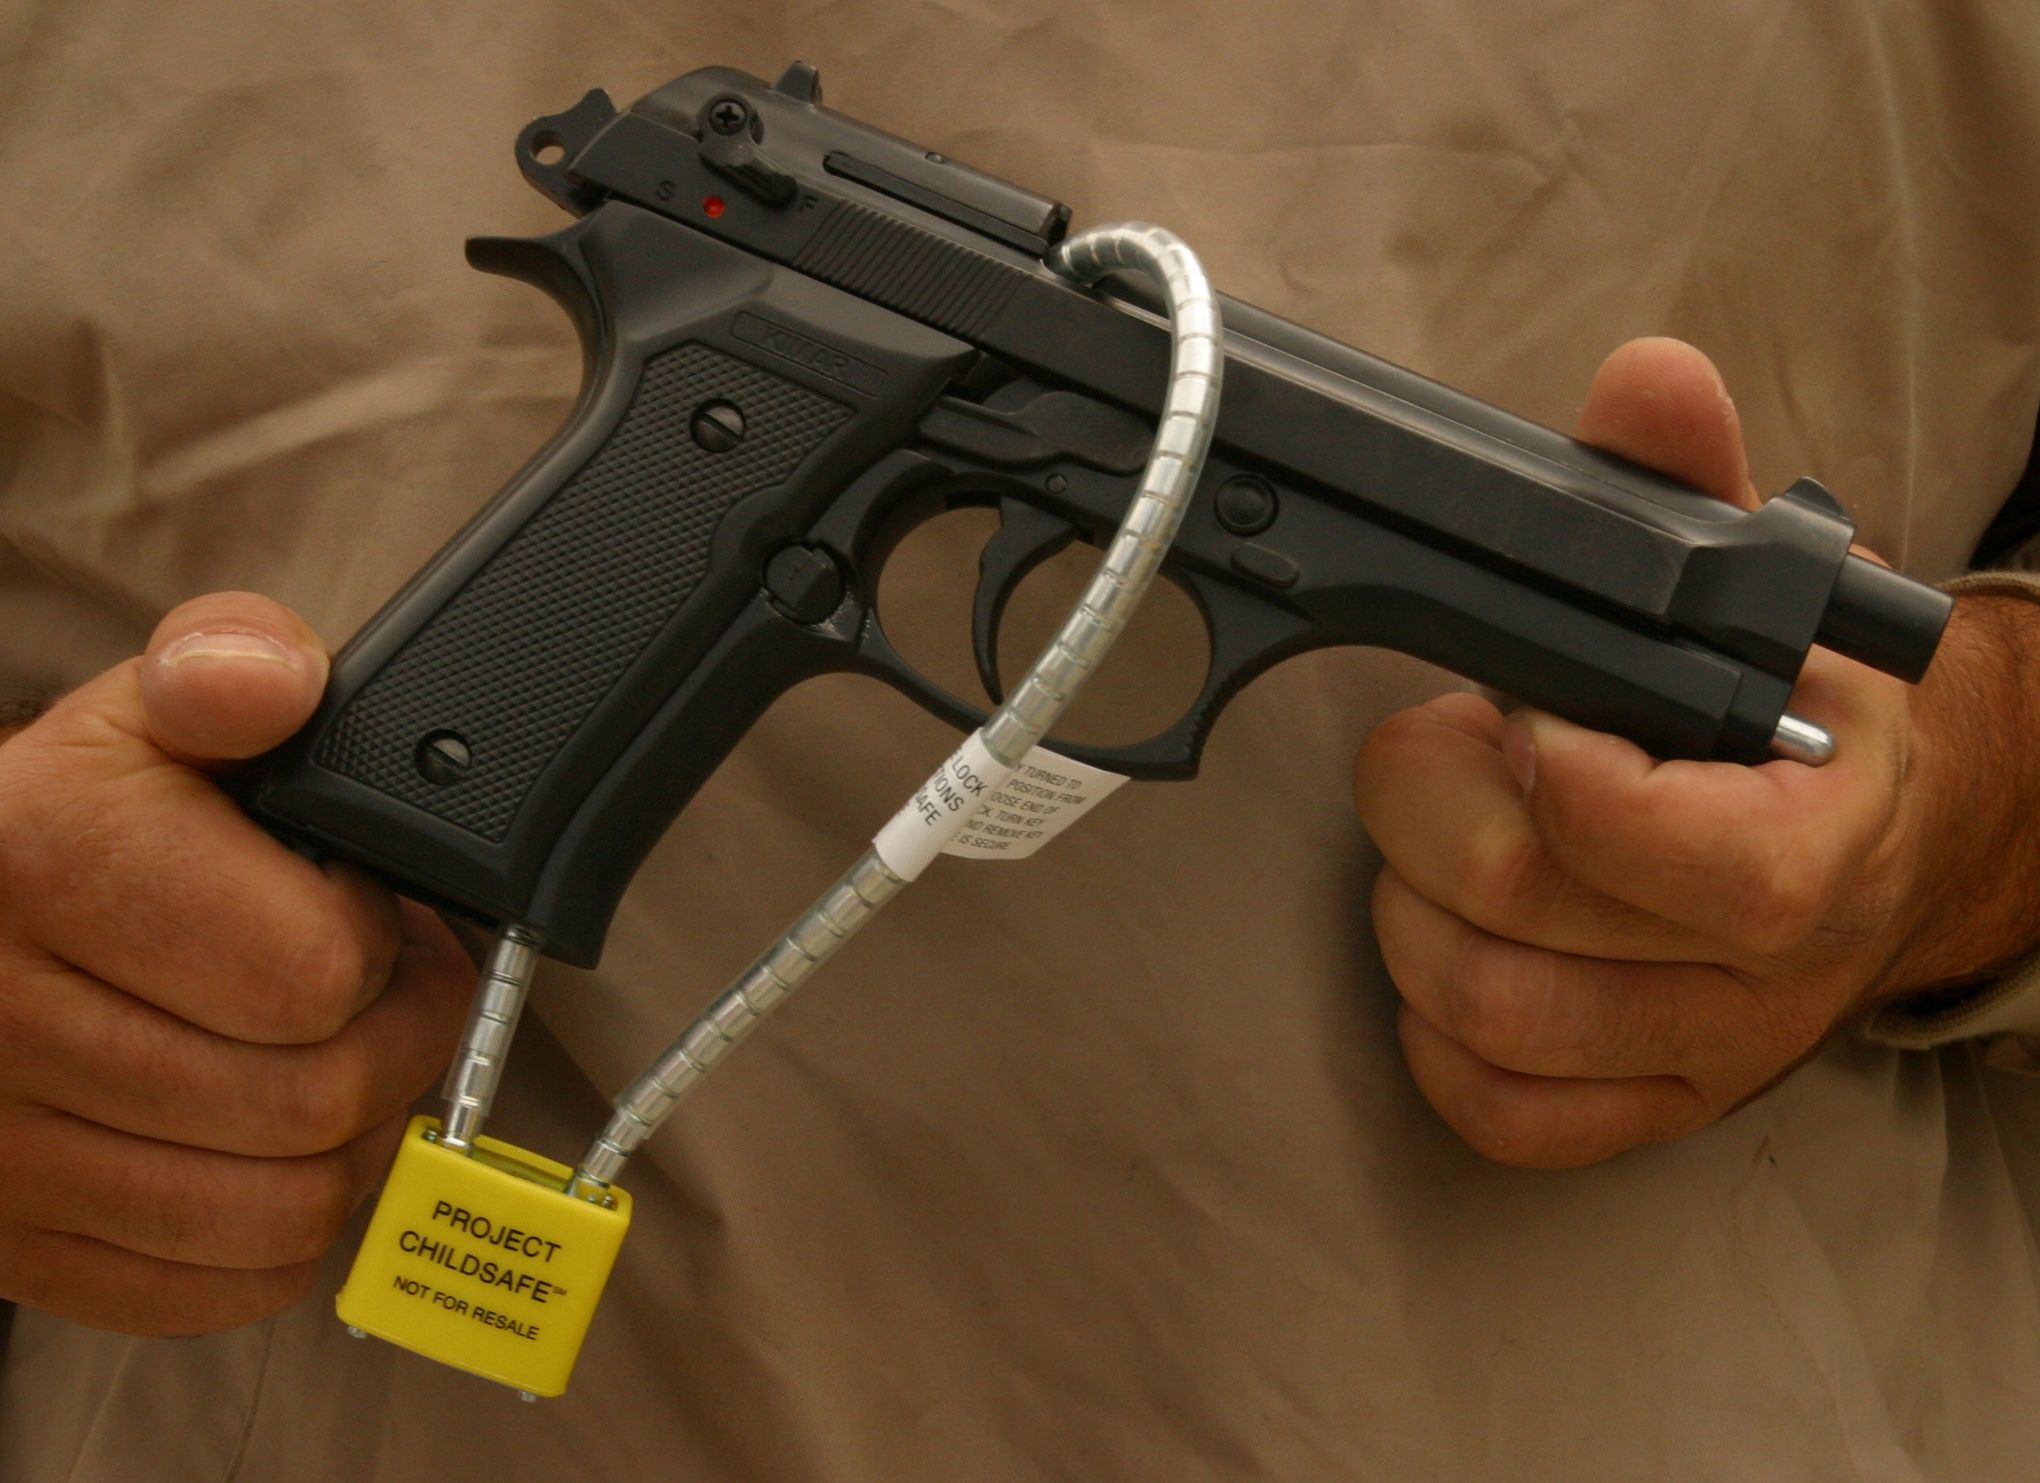 Air-soft guns - Are they safe? - Kids First Pediatric